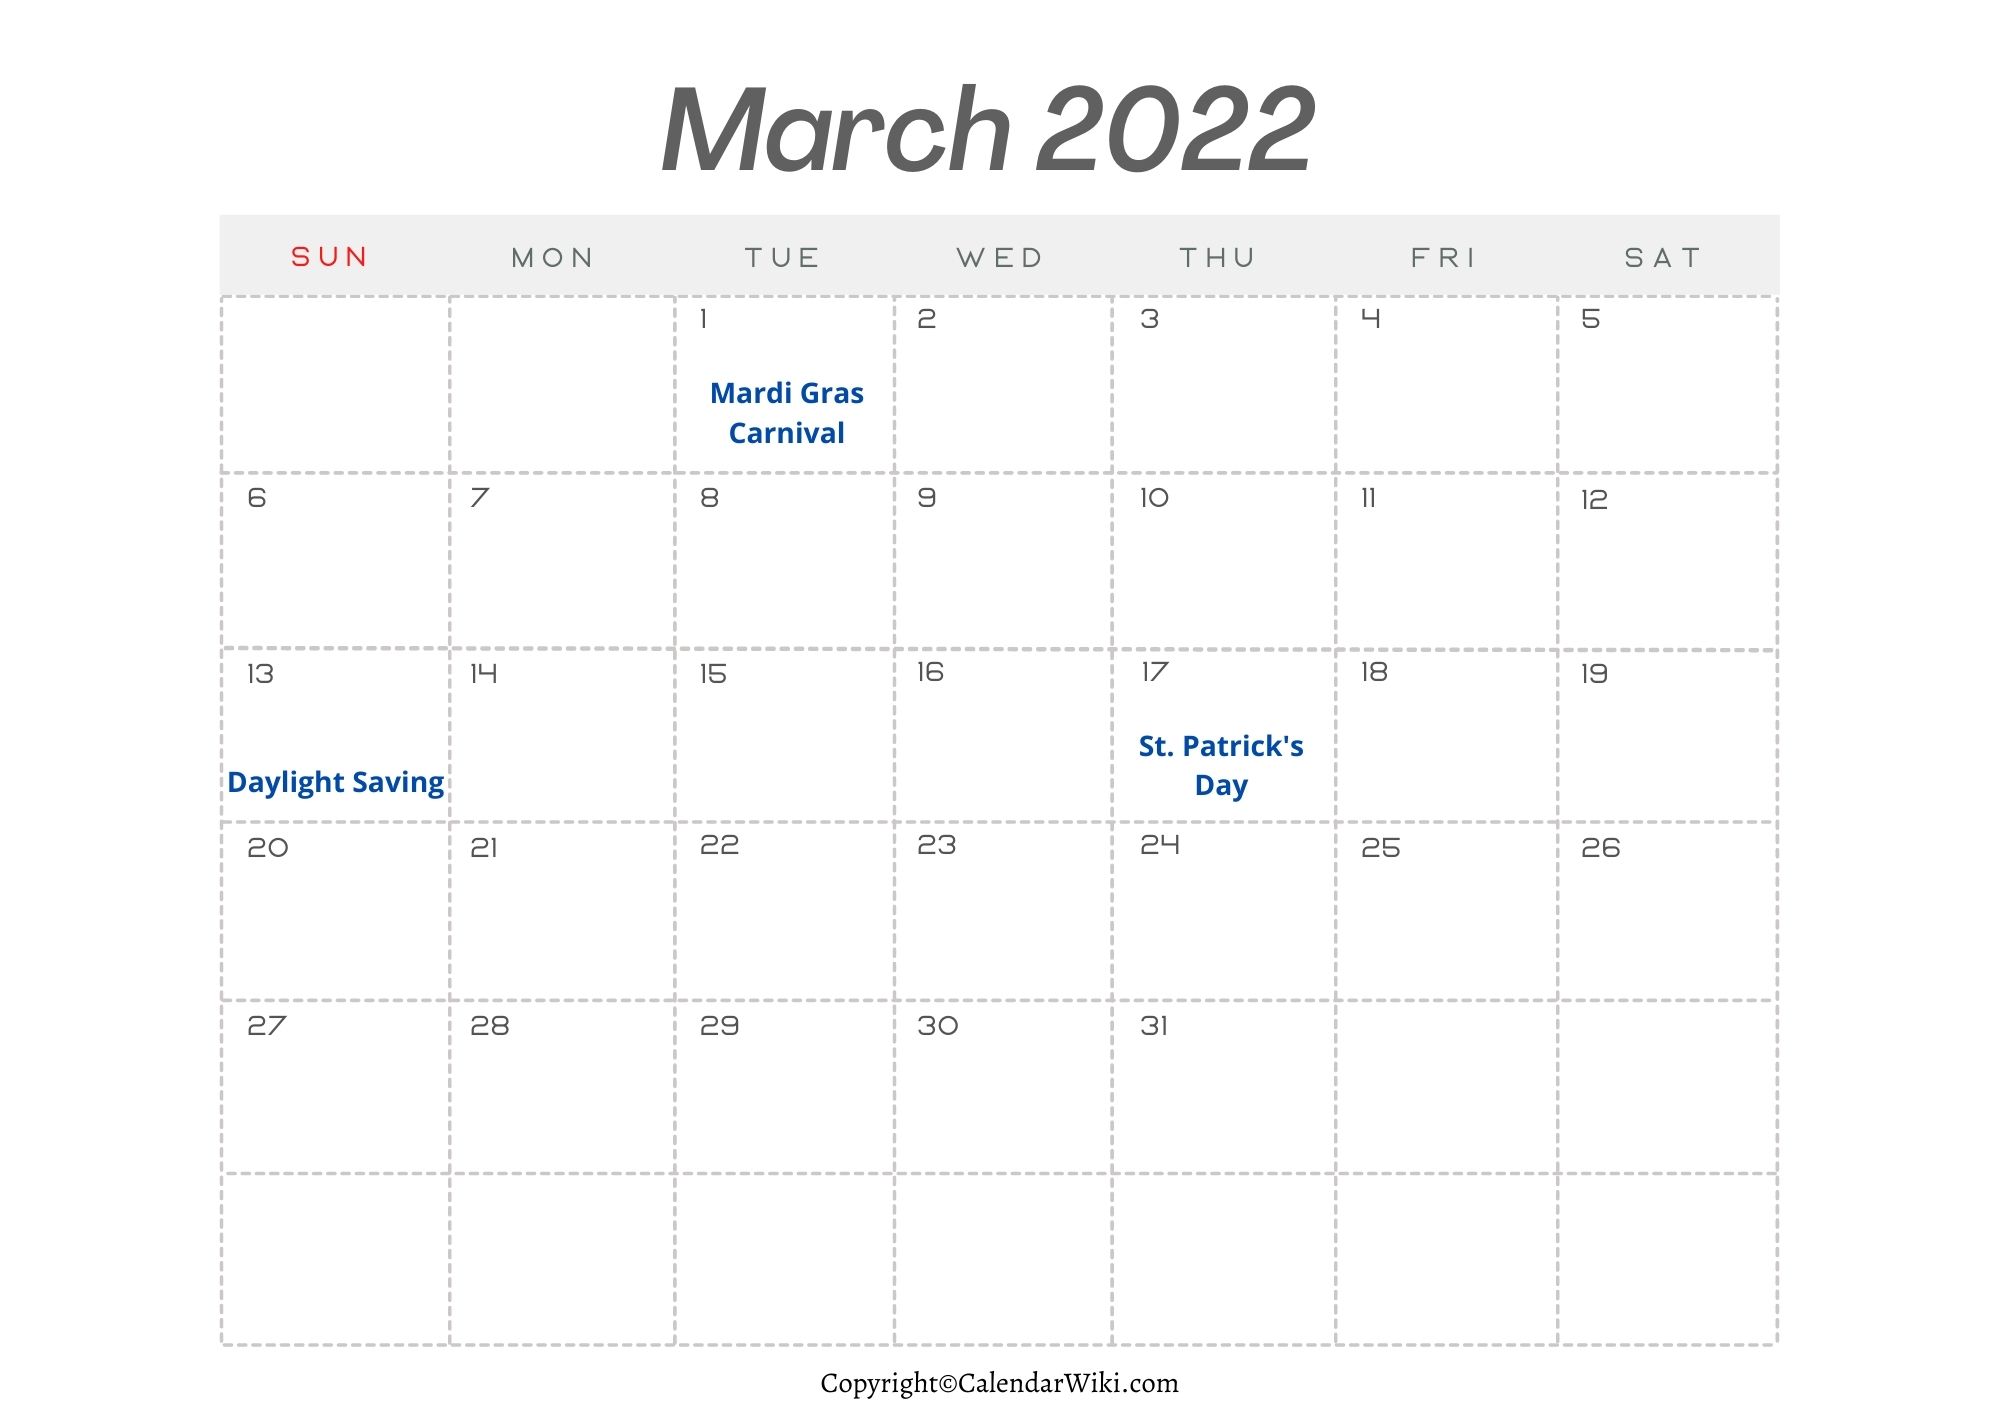 March Holidays 2022